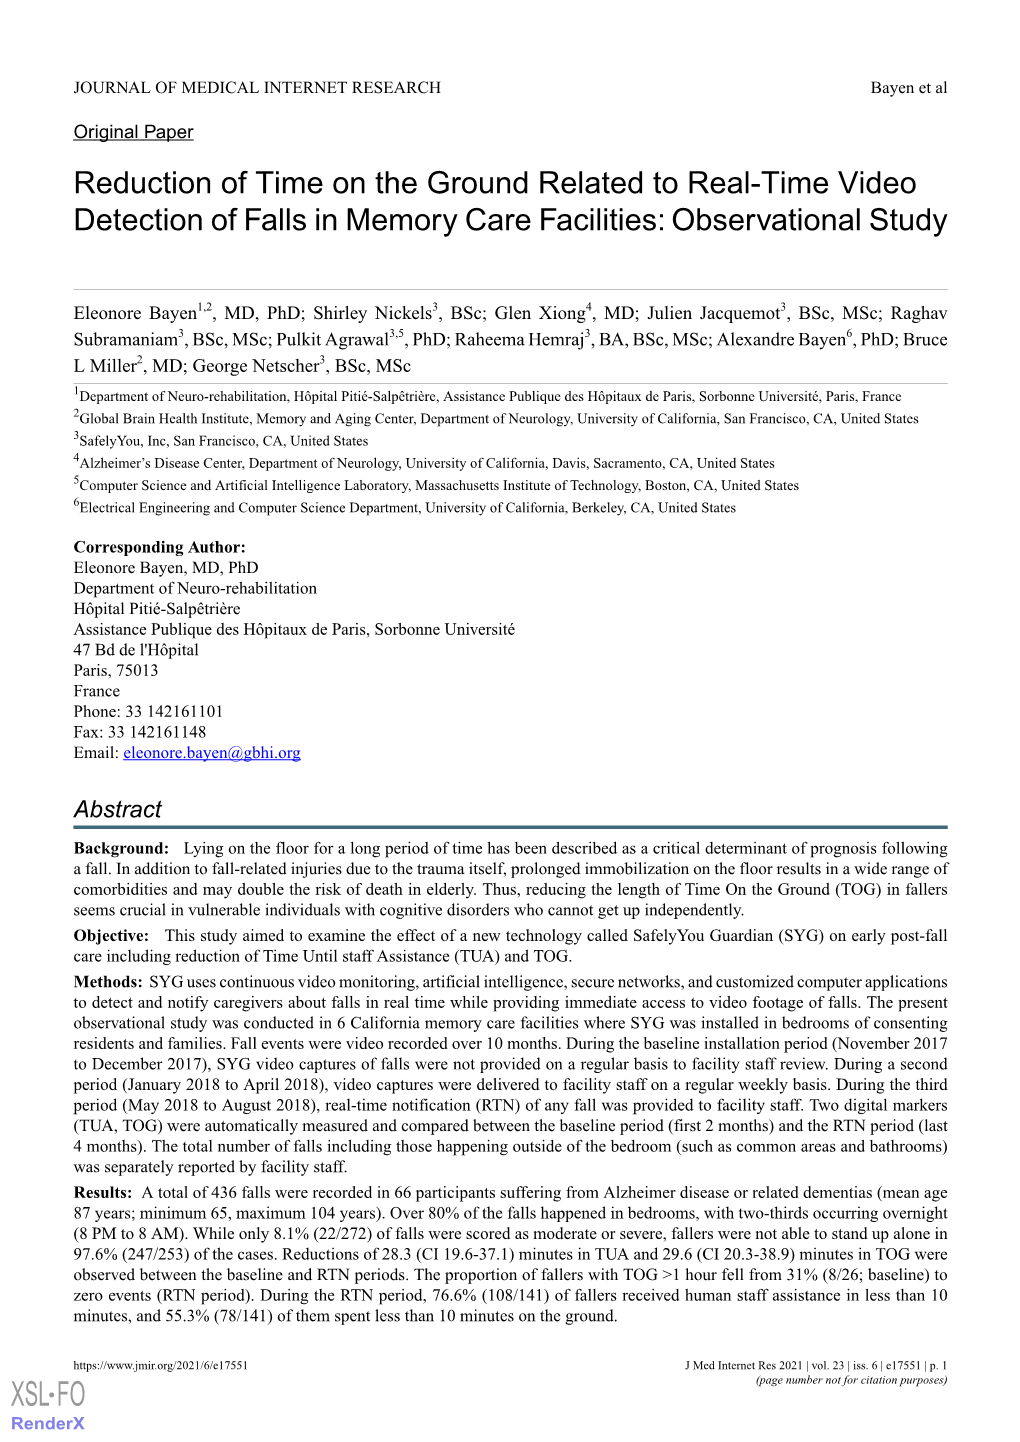 Reduction of Time on the Ground Related to Real-Time Video Detection of Falls in Memory Care Facilities: Observational Study